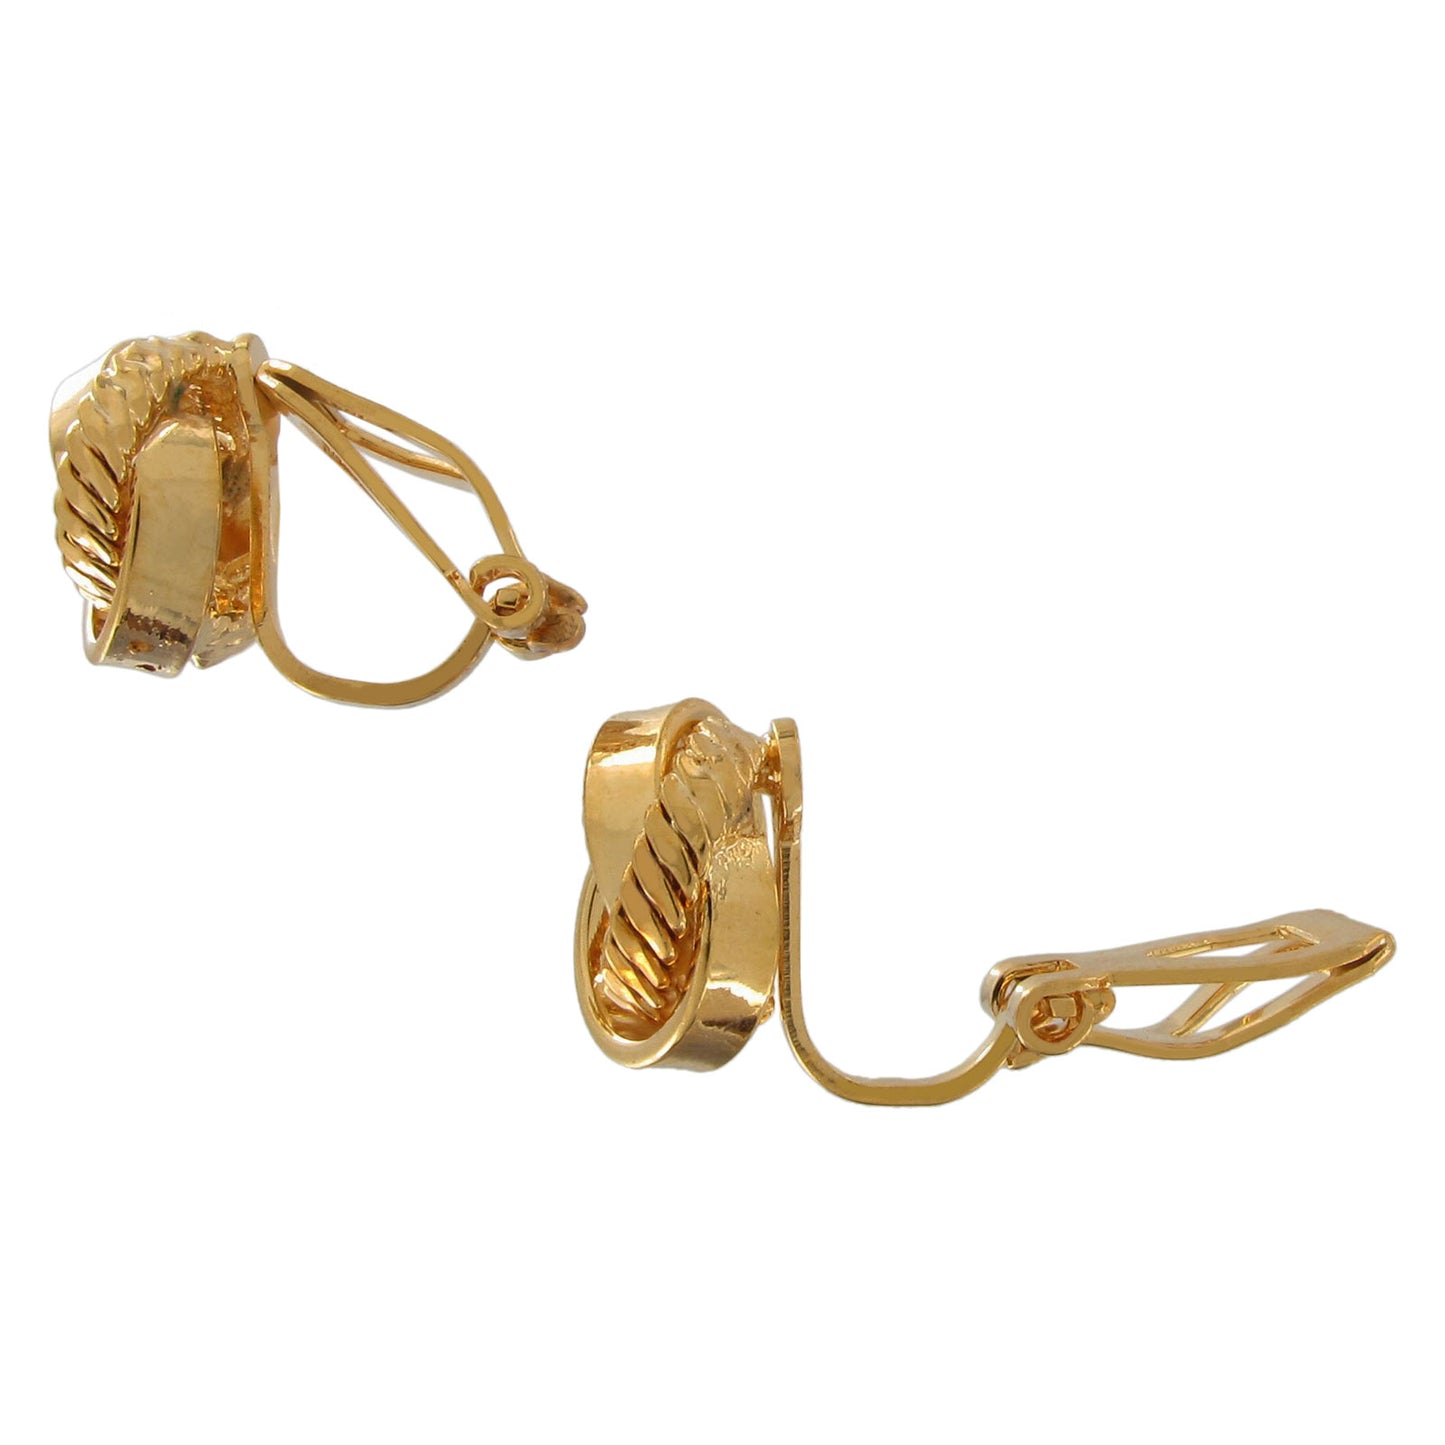 Gold Tone Spiral Ribbed Twisted Knot Clip Earrings Small